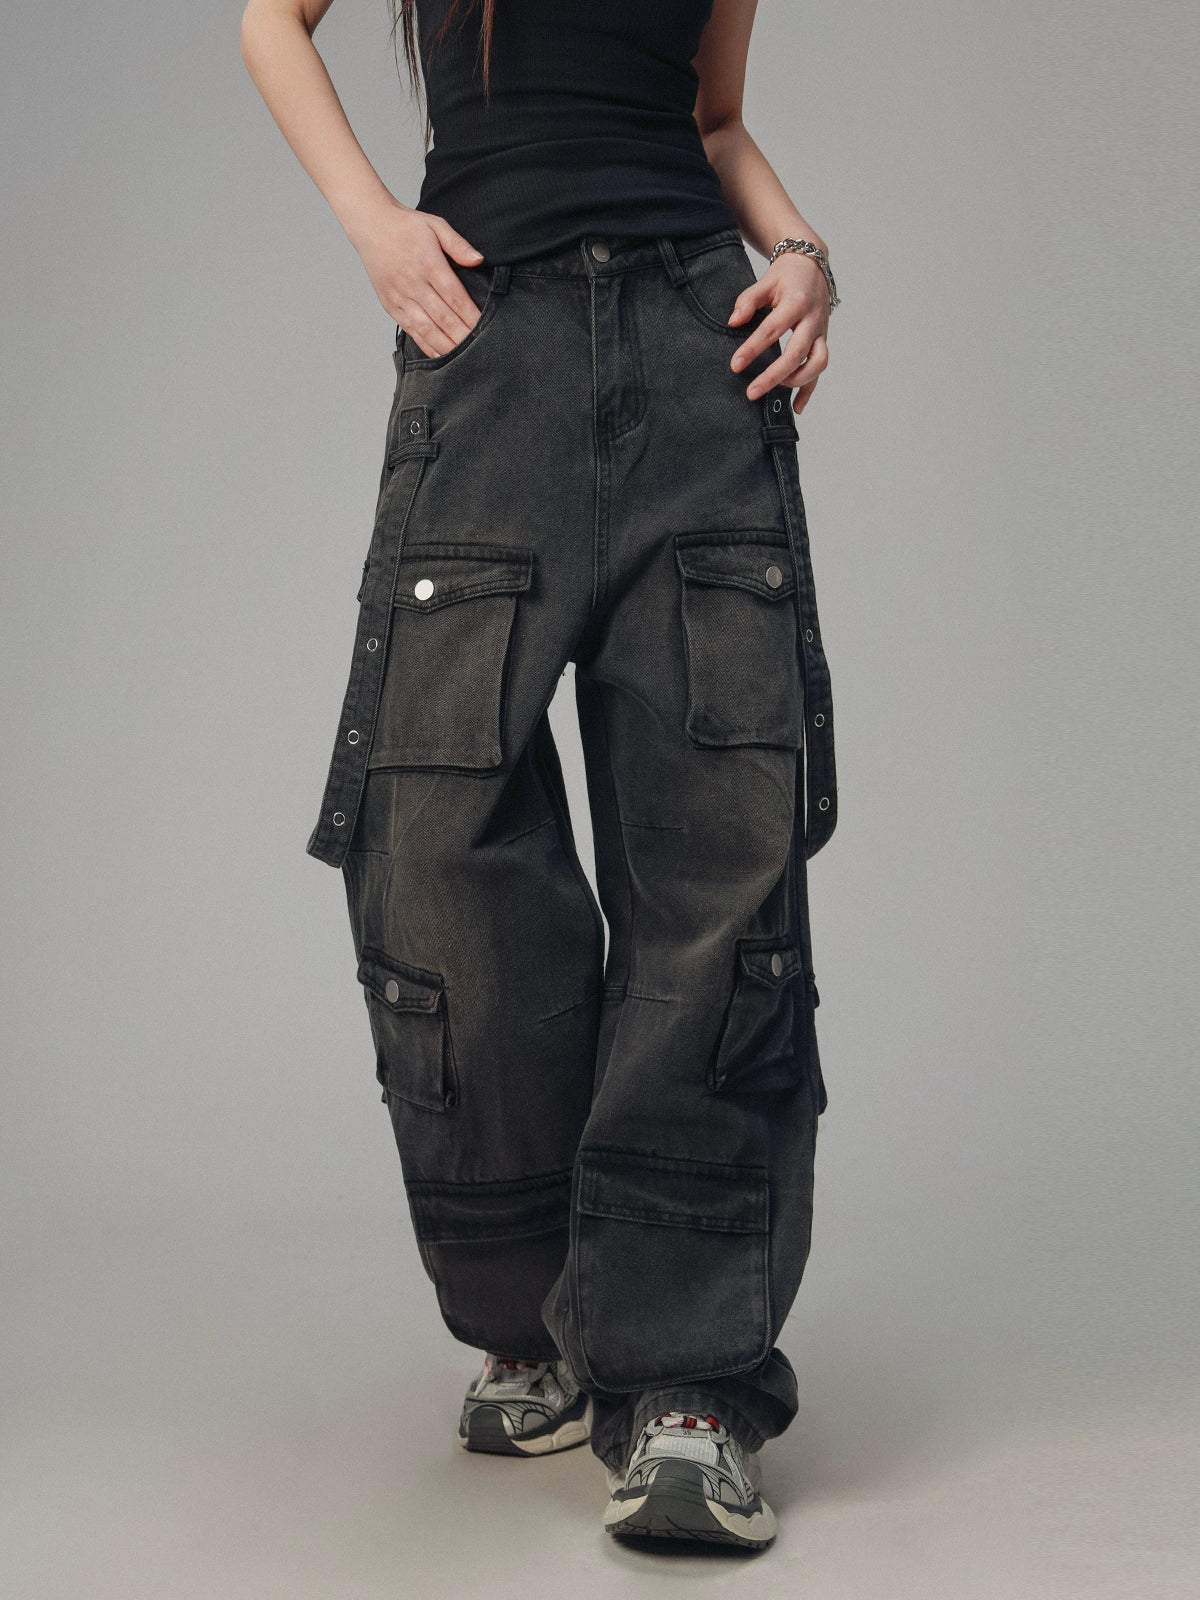 American Wash Distressed Jeans Pants